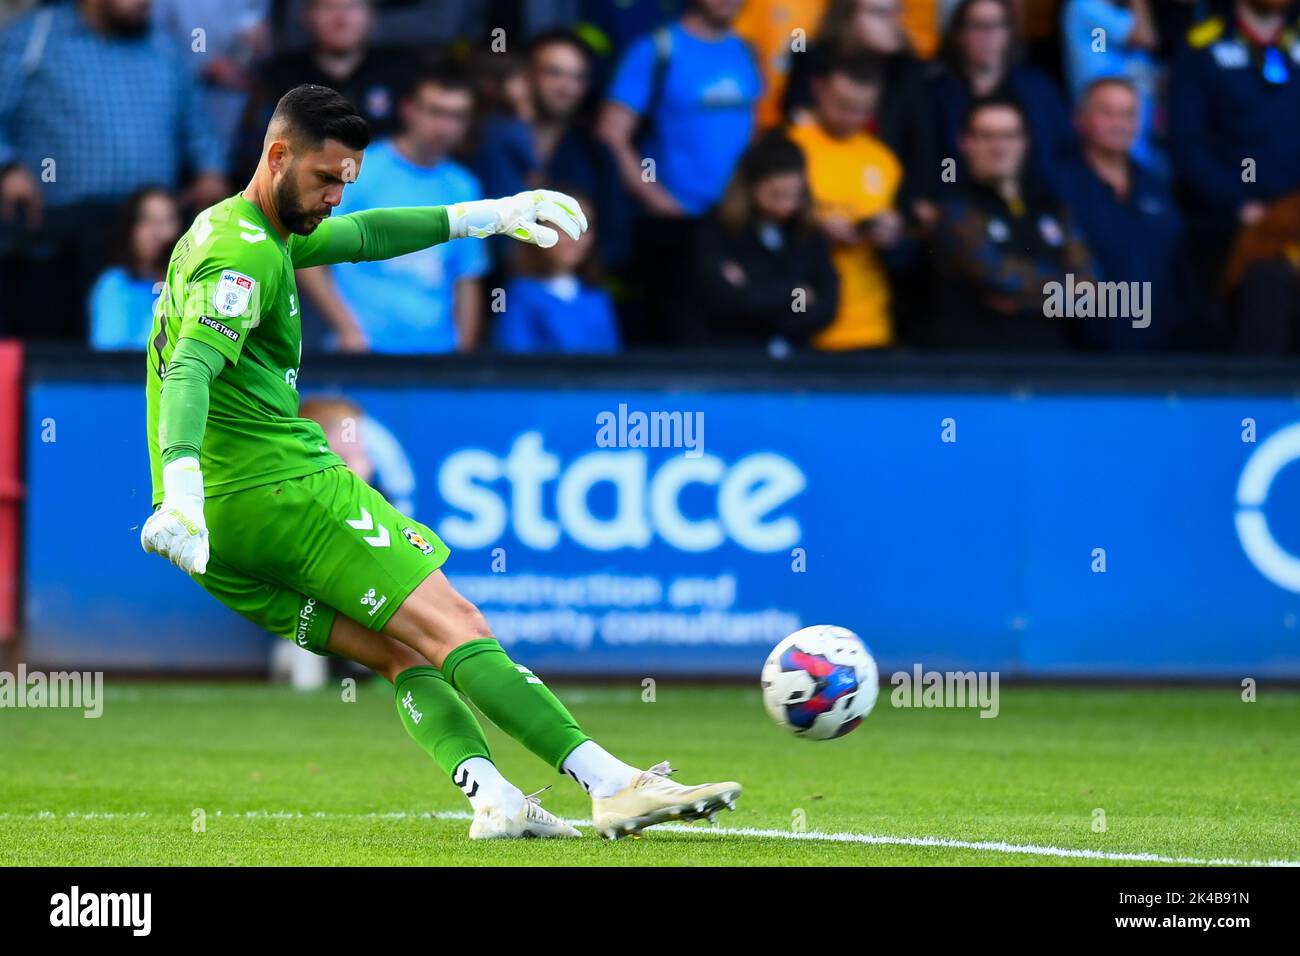 Cambridge, UK. 1st October 2022Goalkeeper dimitar mitov (1 cambridge united) during the Sky Bet League 1 match between Cambridge United and Derby County at the R Costings Abbey Stadium, Cambridge on Saturday 1st October 2022. (Credit: Kevin Hodgson | MI News) Credit: MI News & Sport /Alamy Live News Stock Photo